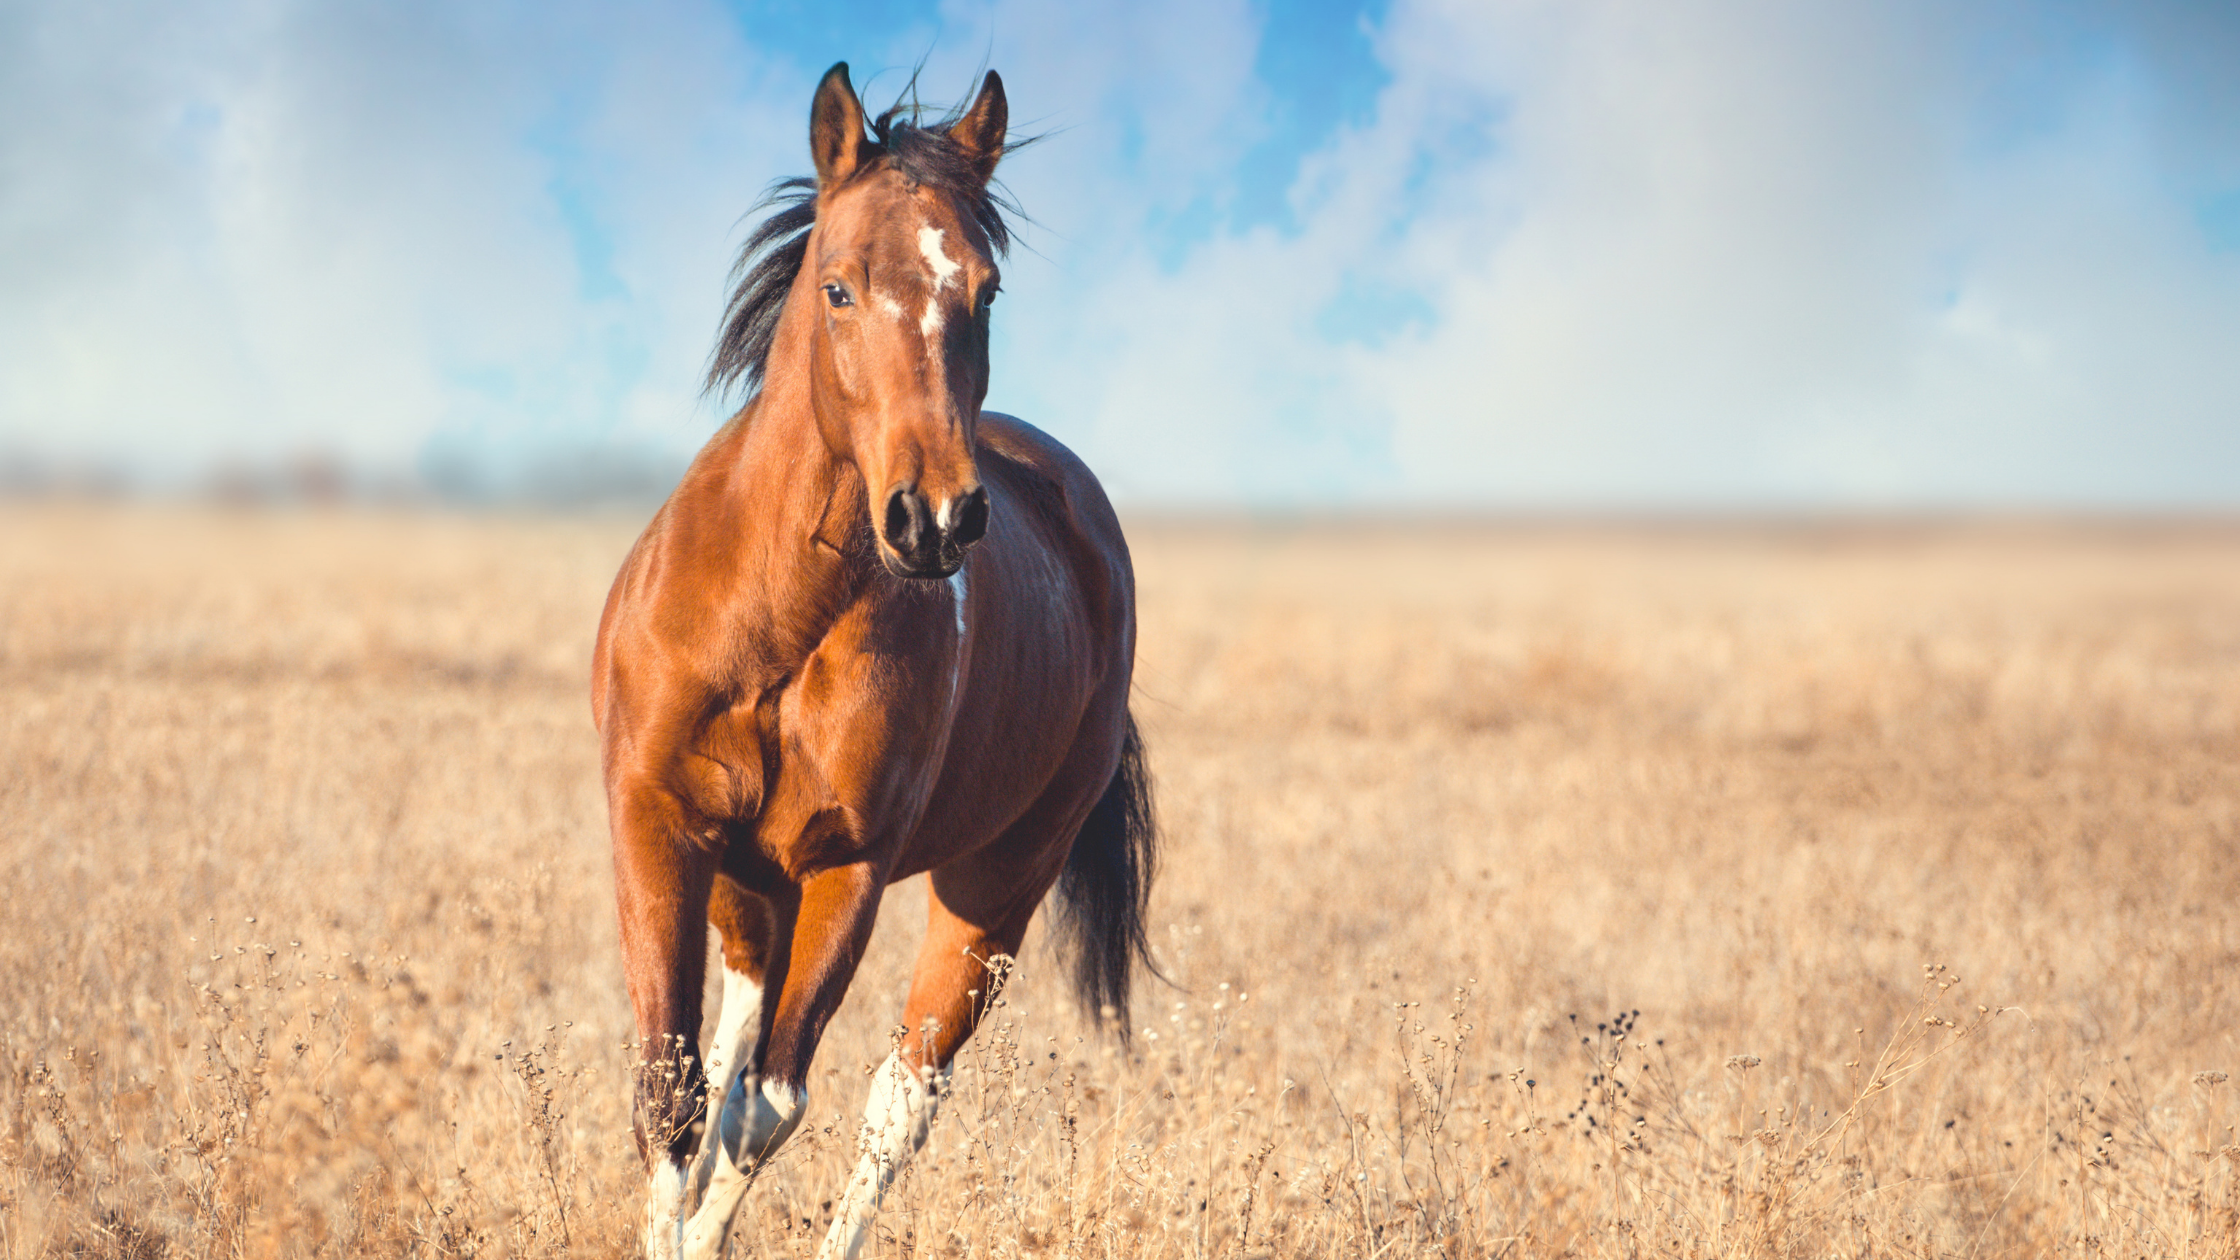 Glucosamine for Horses: What is Glucosamine and Does It Work? Image